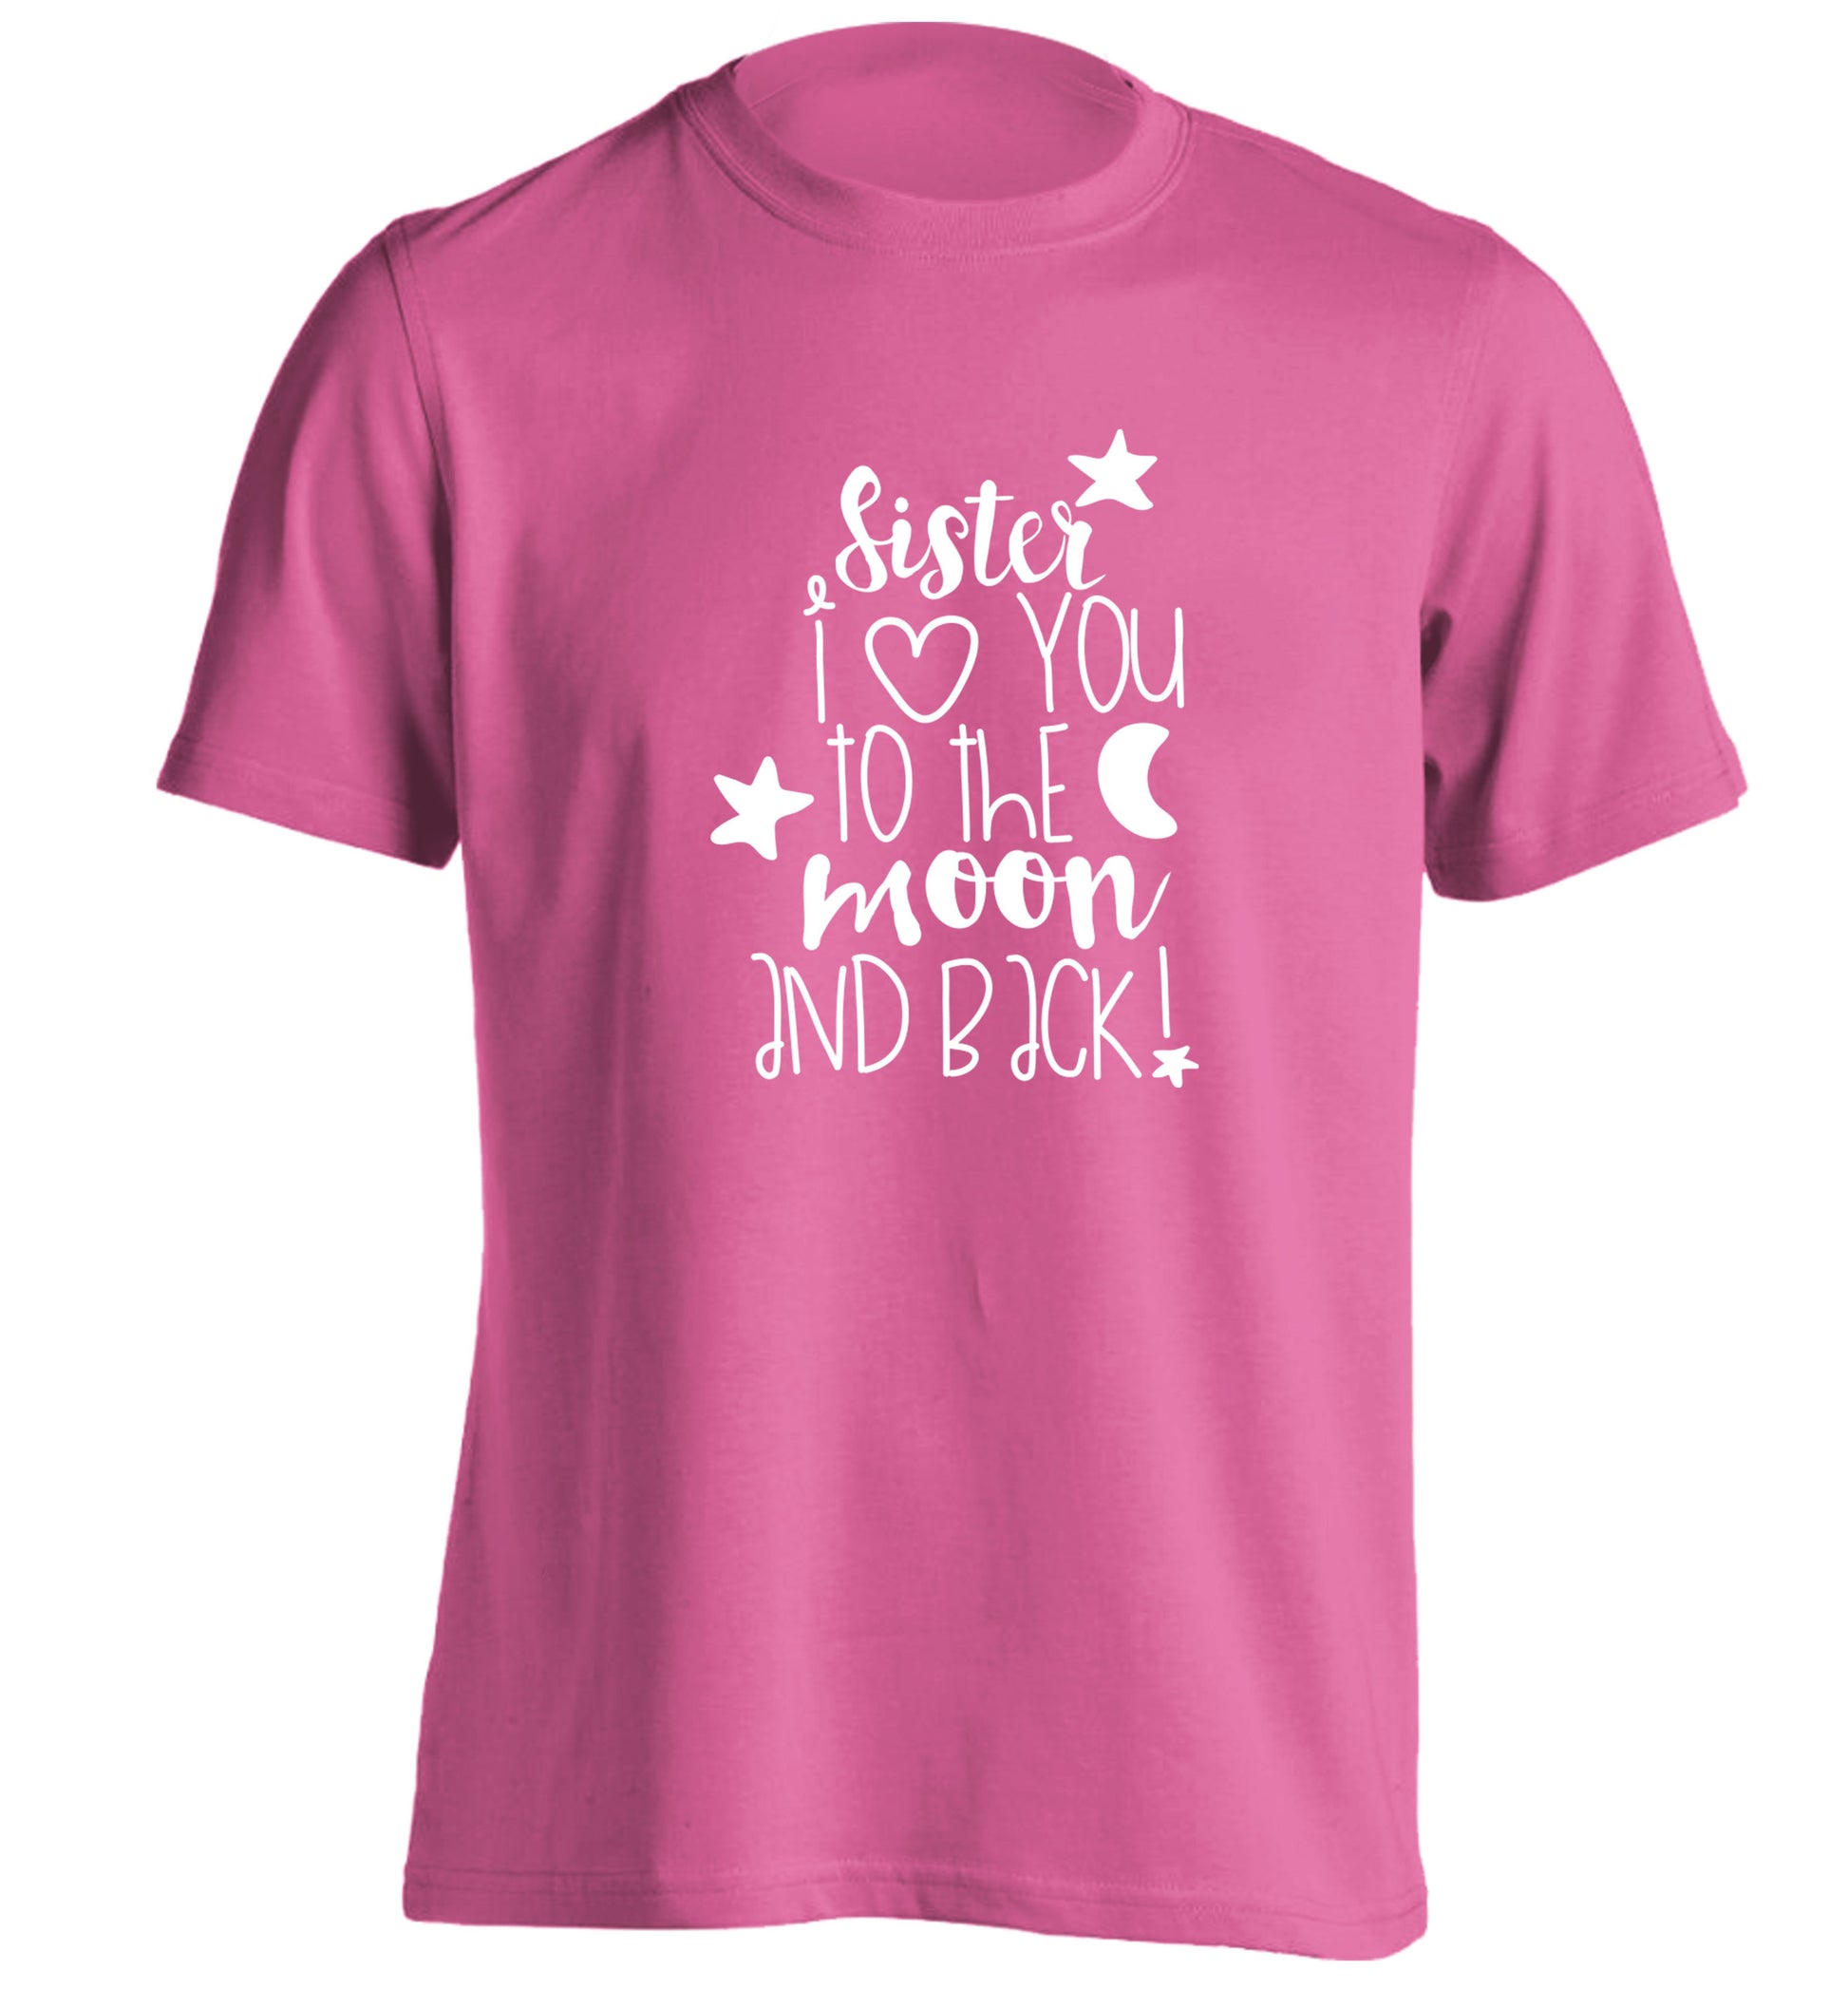 Sister I love you to the moon and back adults unisex pink Tshirt 2XL